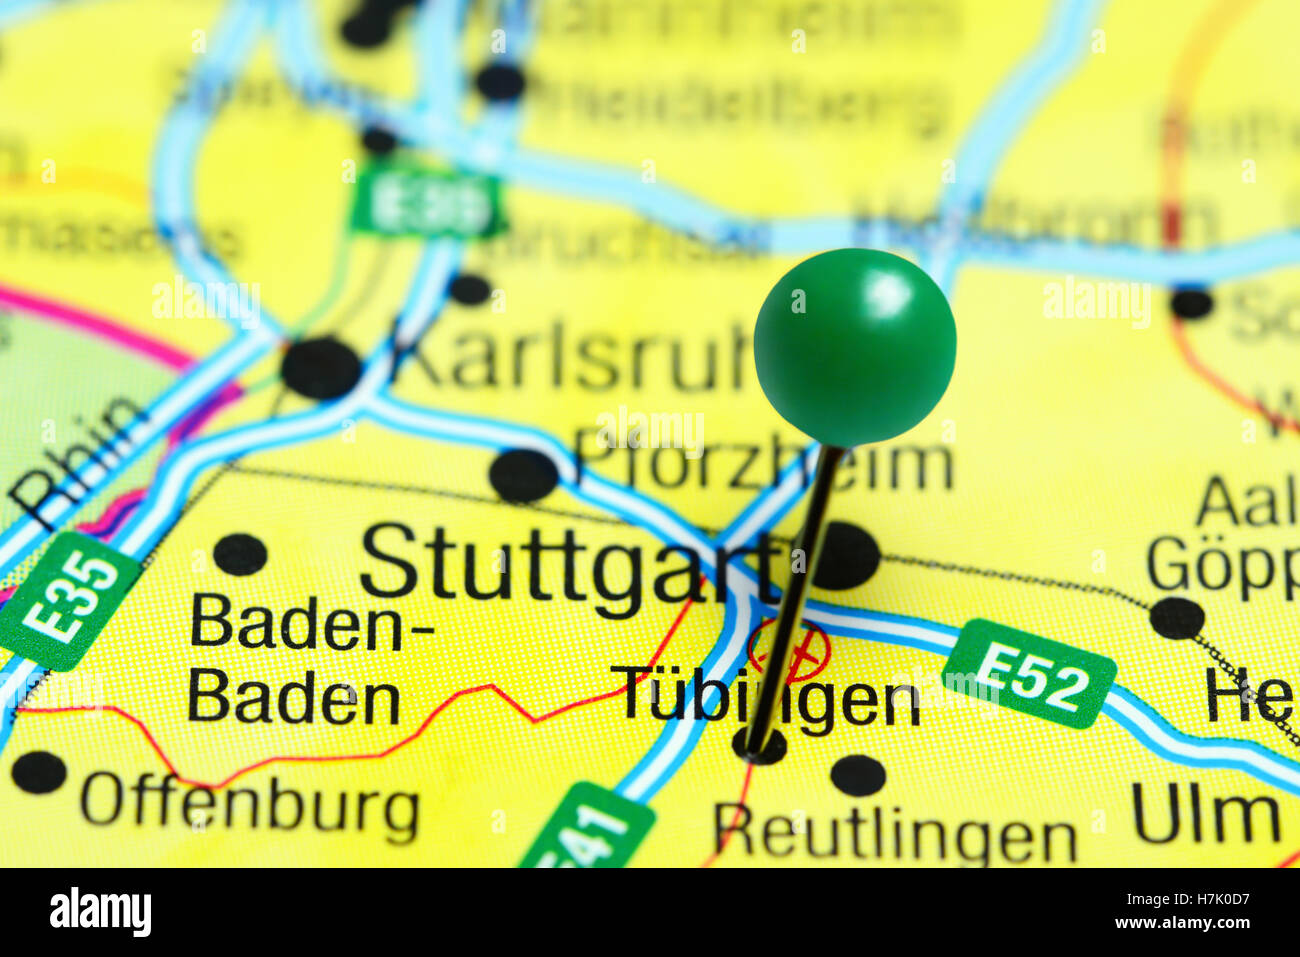 Tubingen pinned on a map of Germany Stock Photo